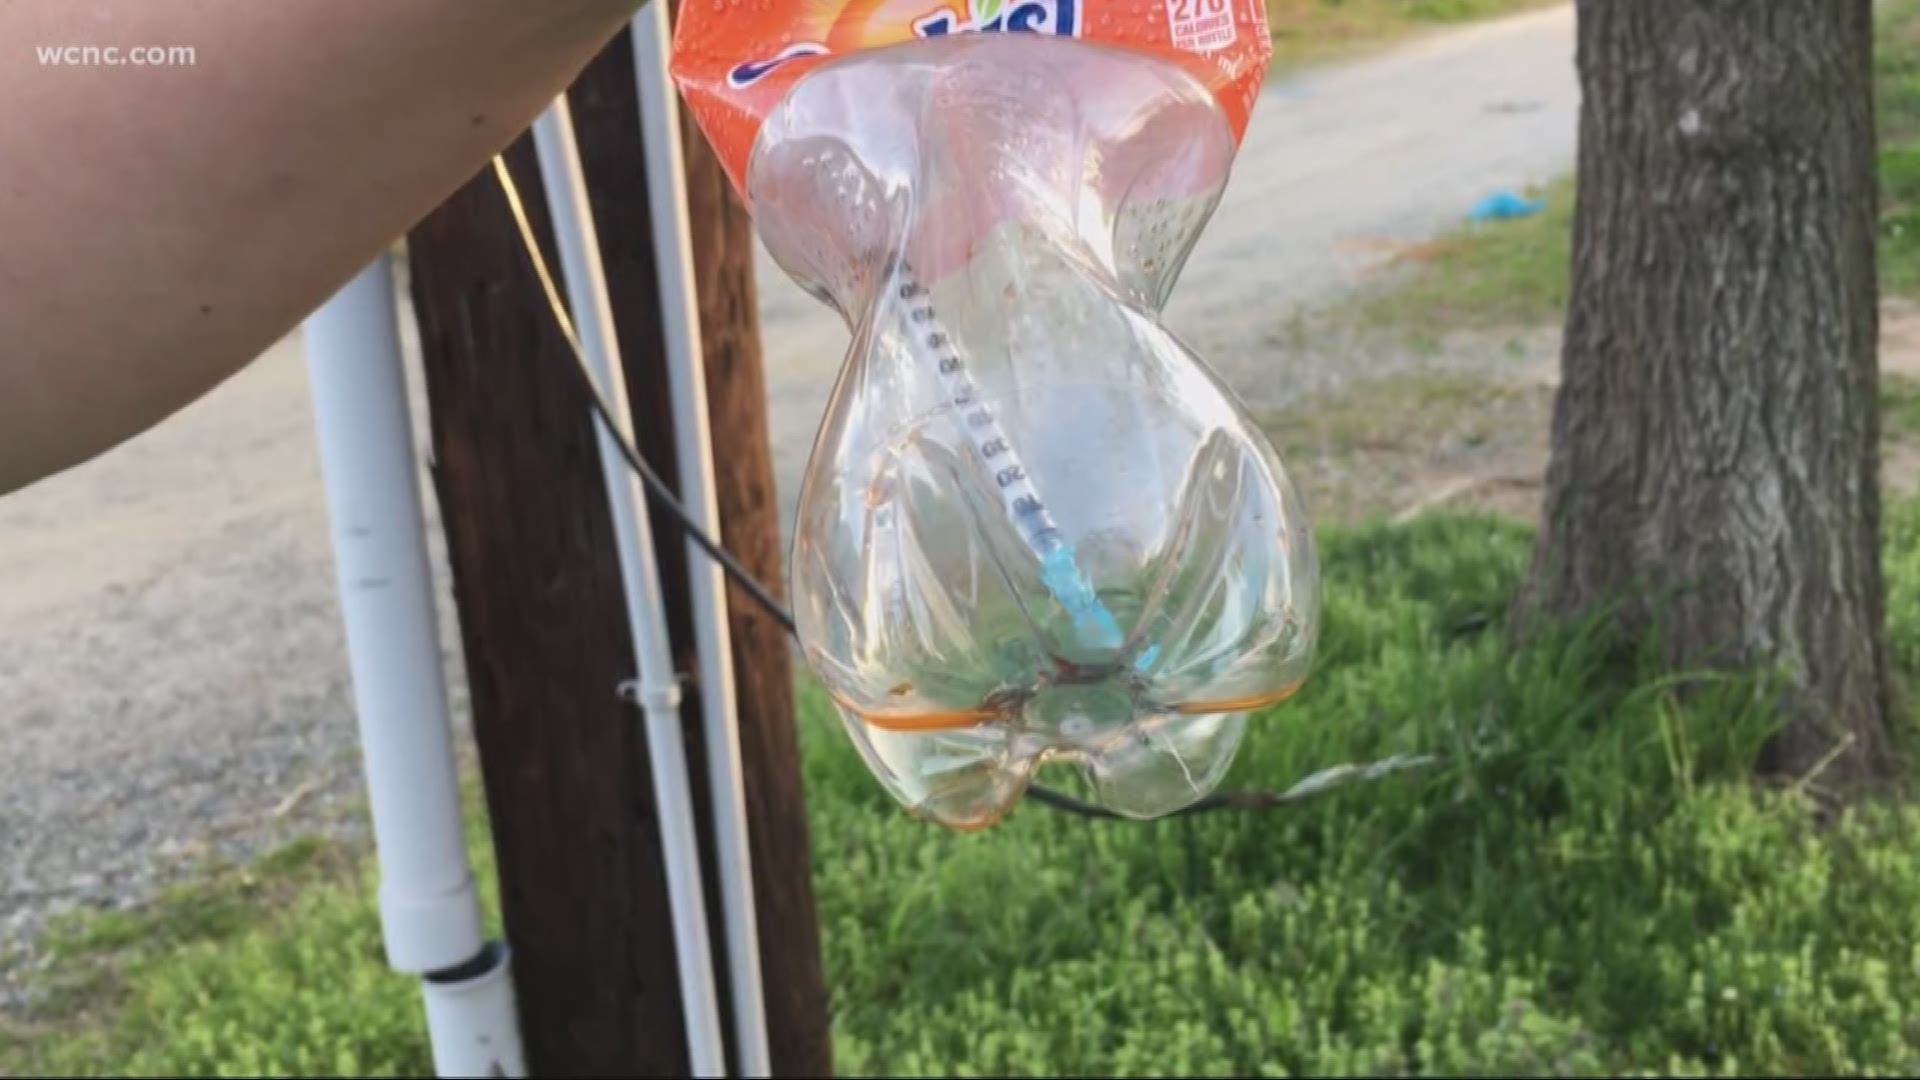 A drug epidemic that is gripping the nation has landed in a local woman's front yard. Now she's forced to "walk the yard" before letting her kids go outside to play.